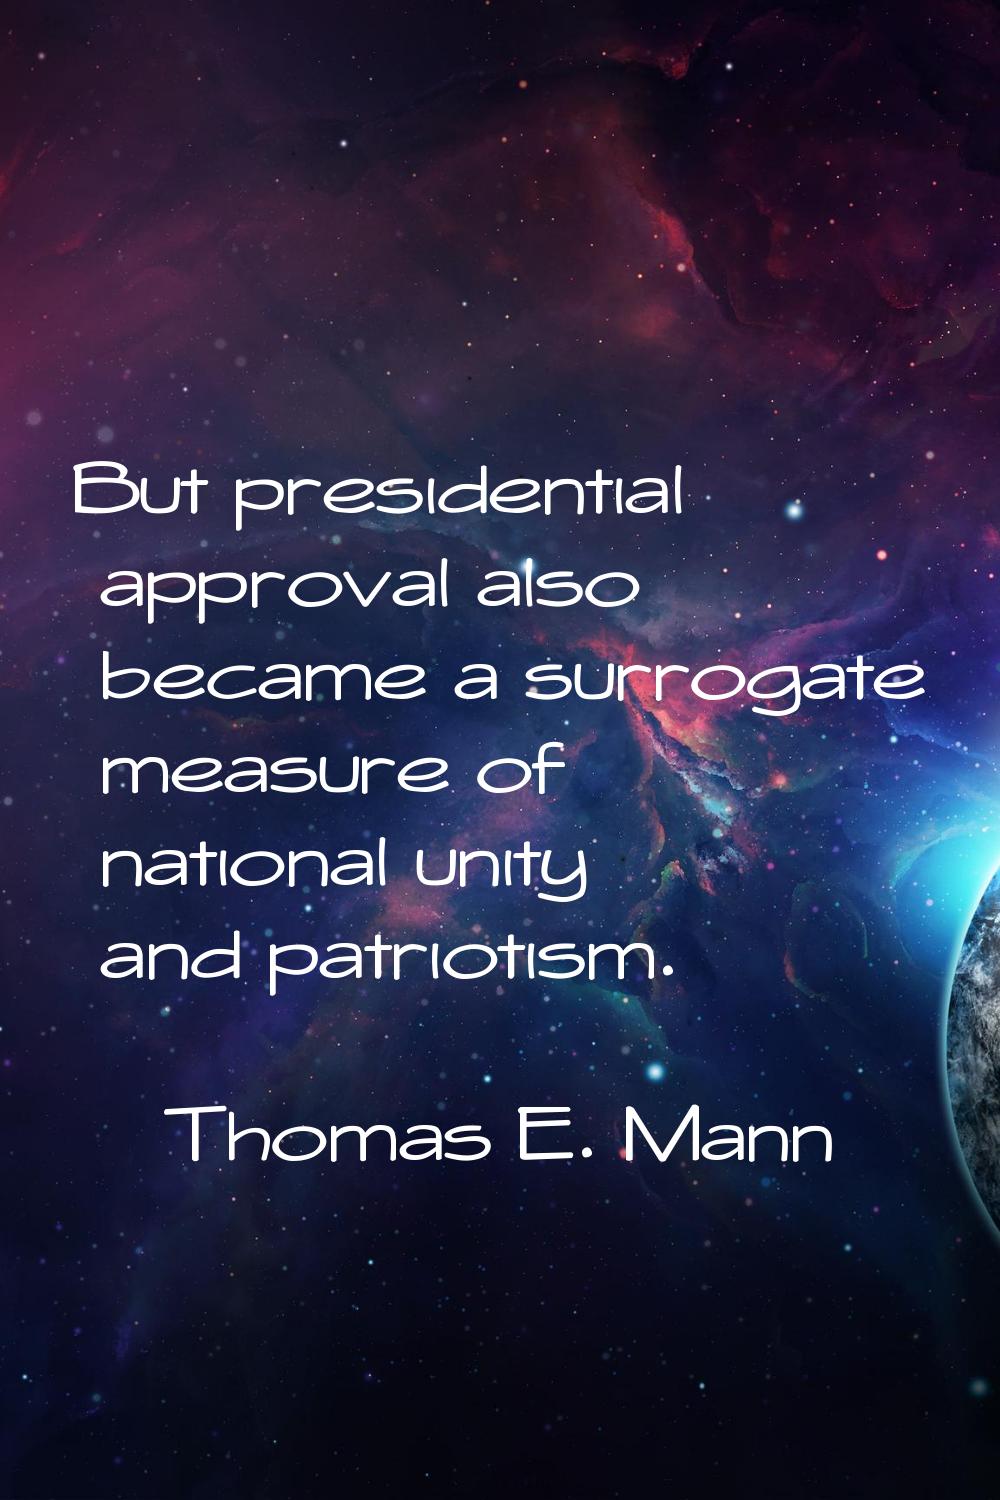 But presidential approval also became a surrogate measure of national unity and patriotism.